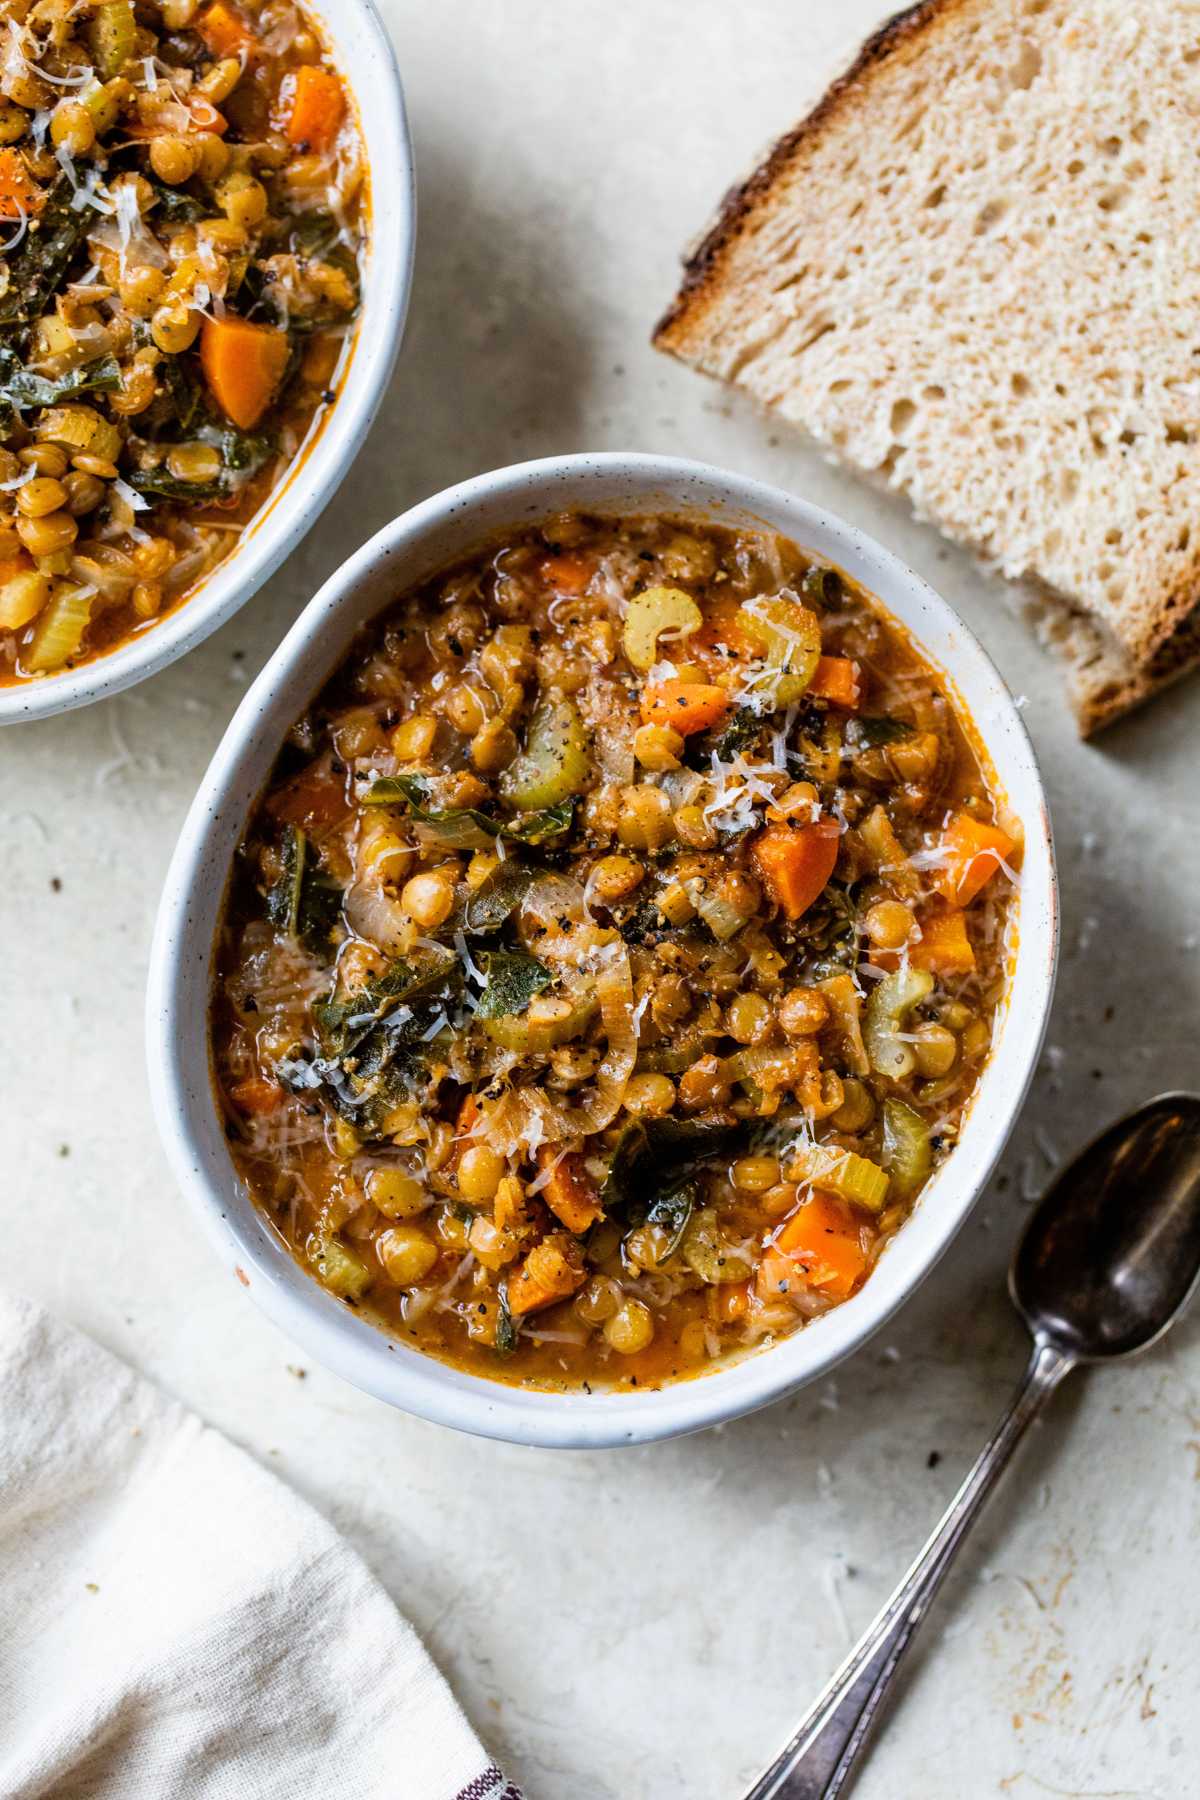 Green lentil soup served in a white bowl with a slice of bread.